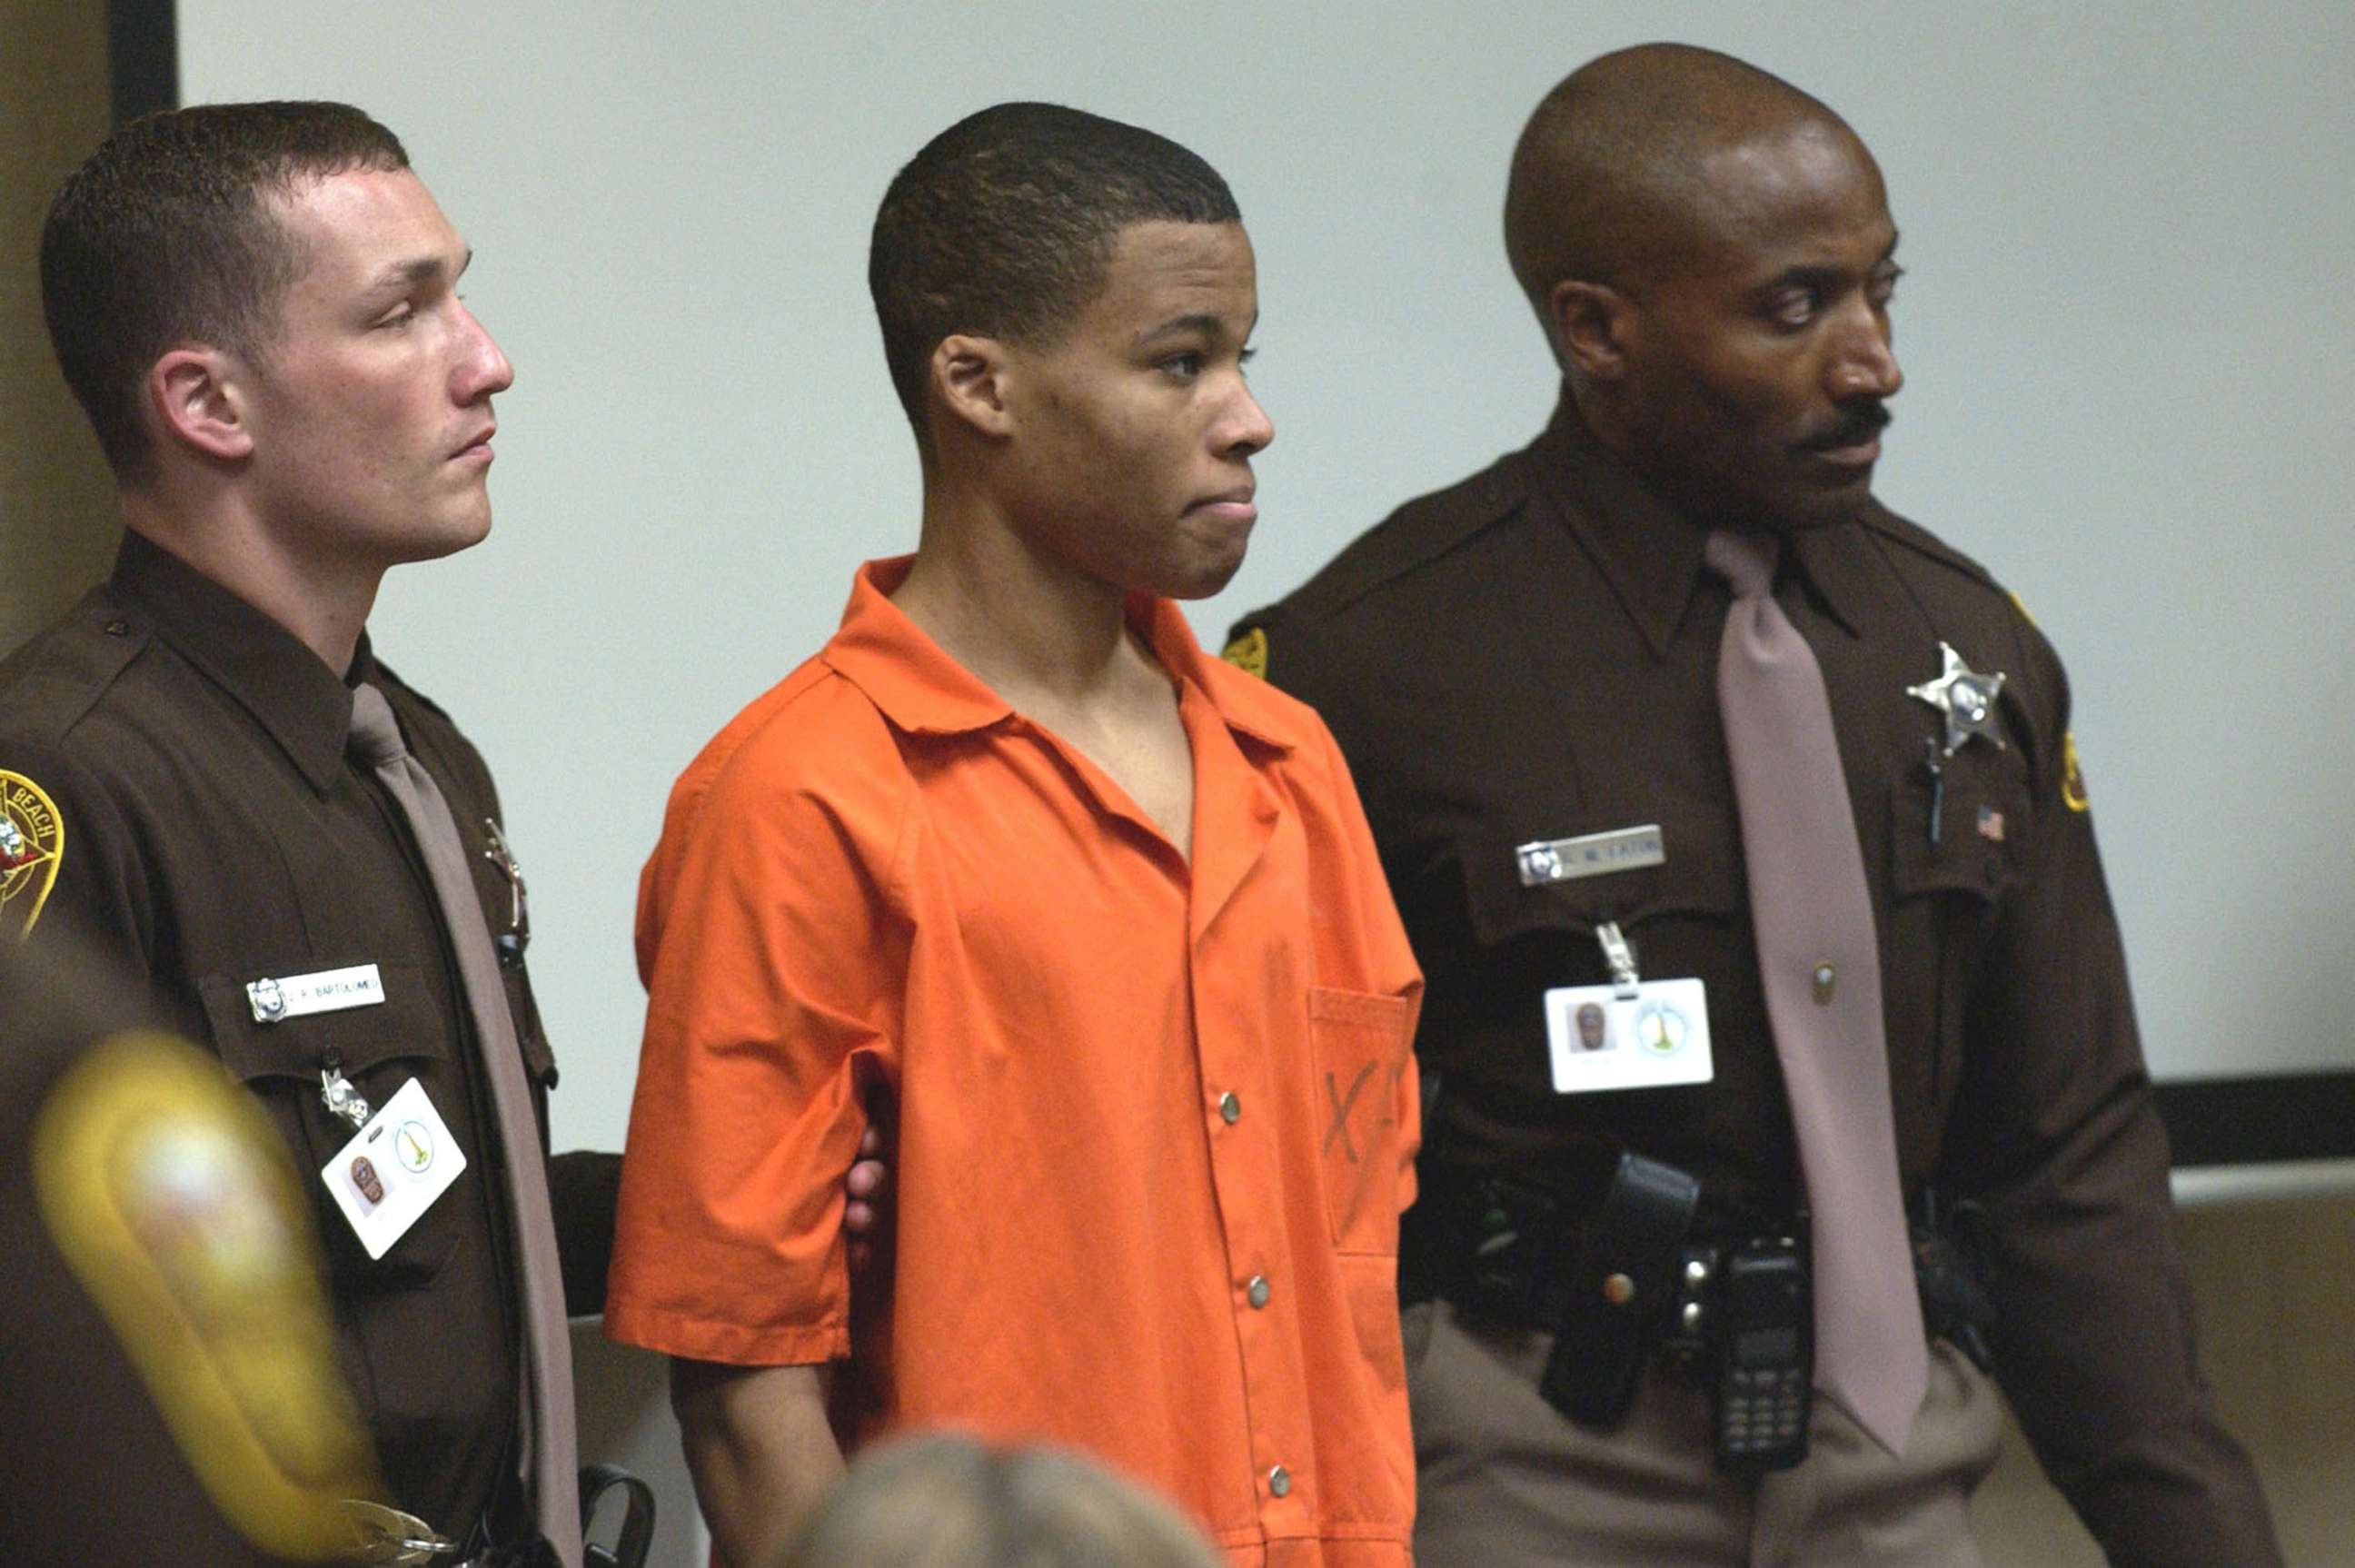 PHOTO: Sniper suspect Lee Boyd Malvo, 18, is surrounded by deputies as he is brought into court to be identified by a witness during the trial of sniper suspect John Allen Muhammad at the Virginia Beach Circuit Court, Oct. 22, 2003.